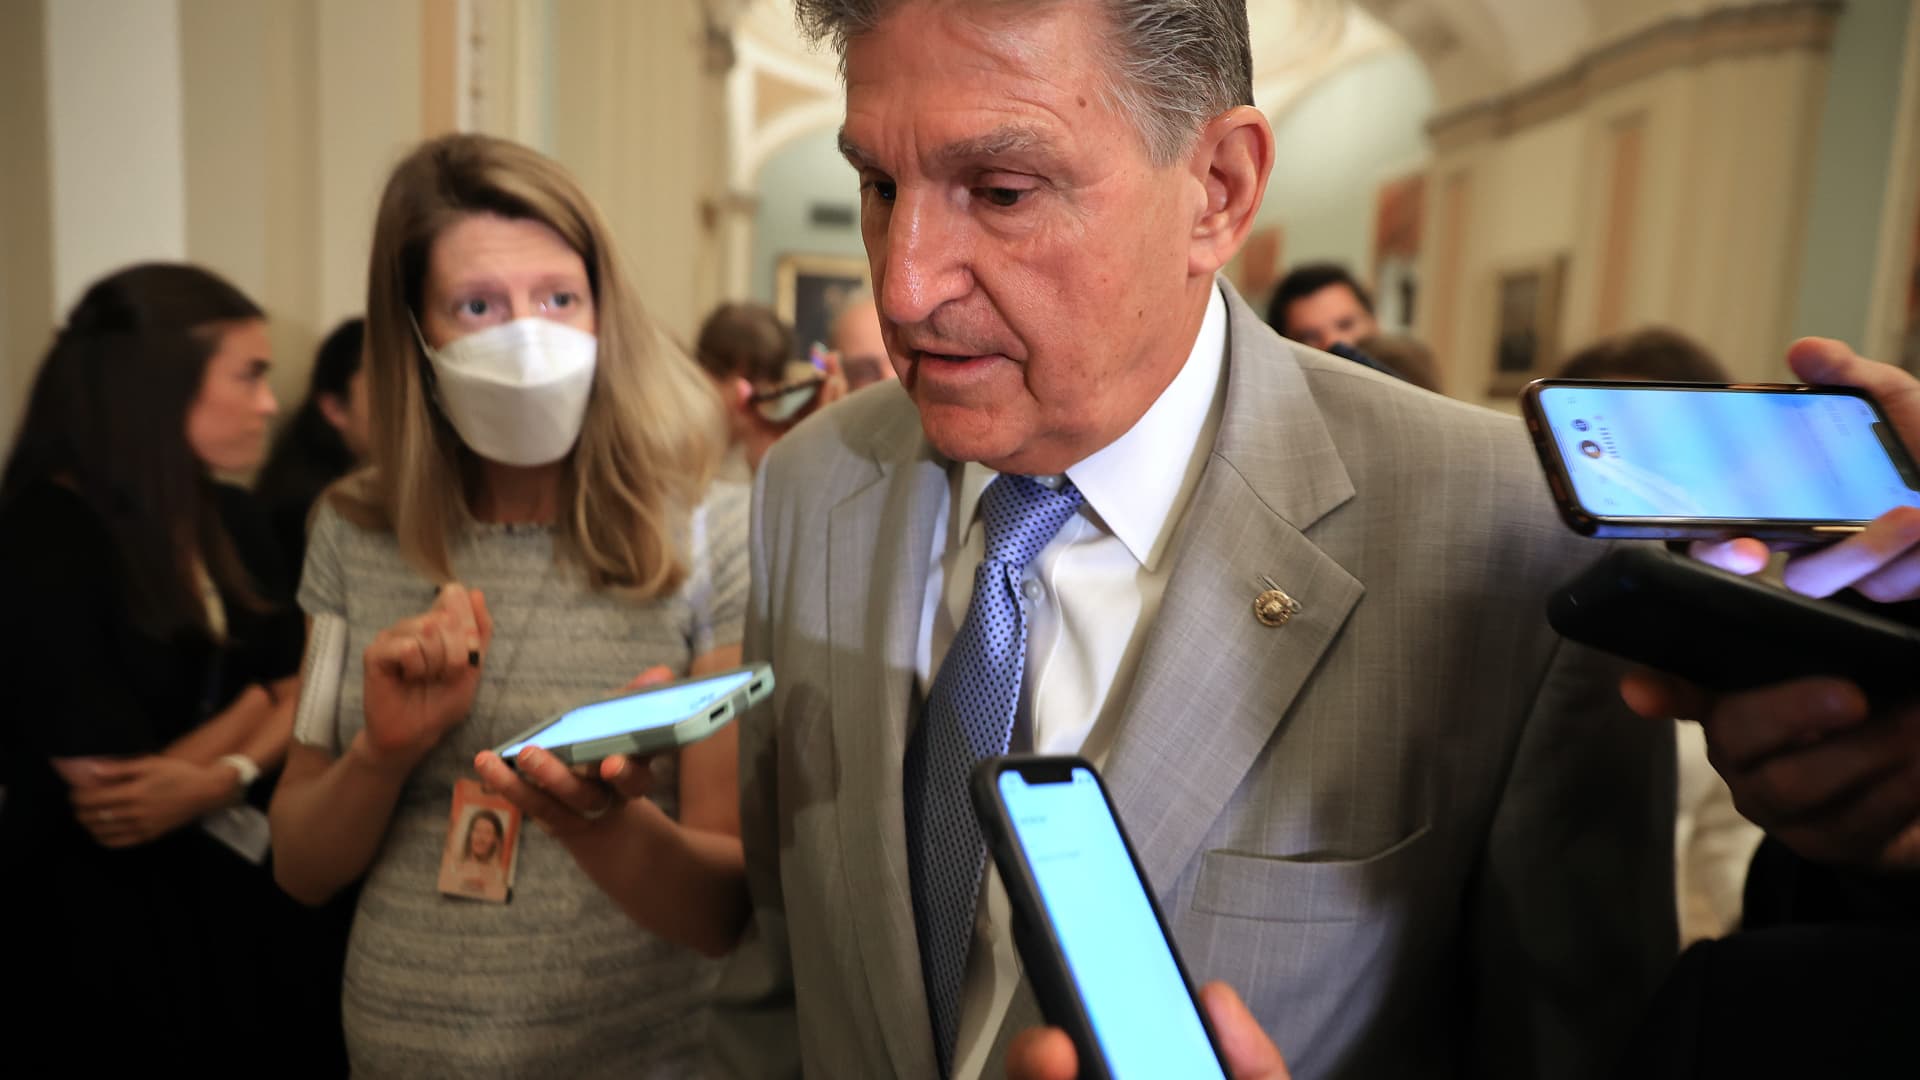 Manchin-Schumer Reconciliation Deal: Day-After Reactions